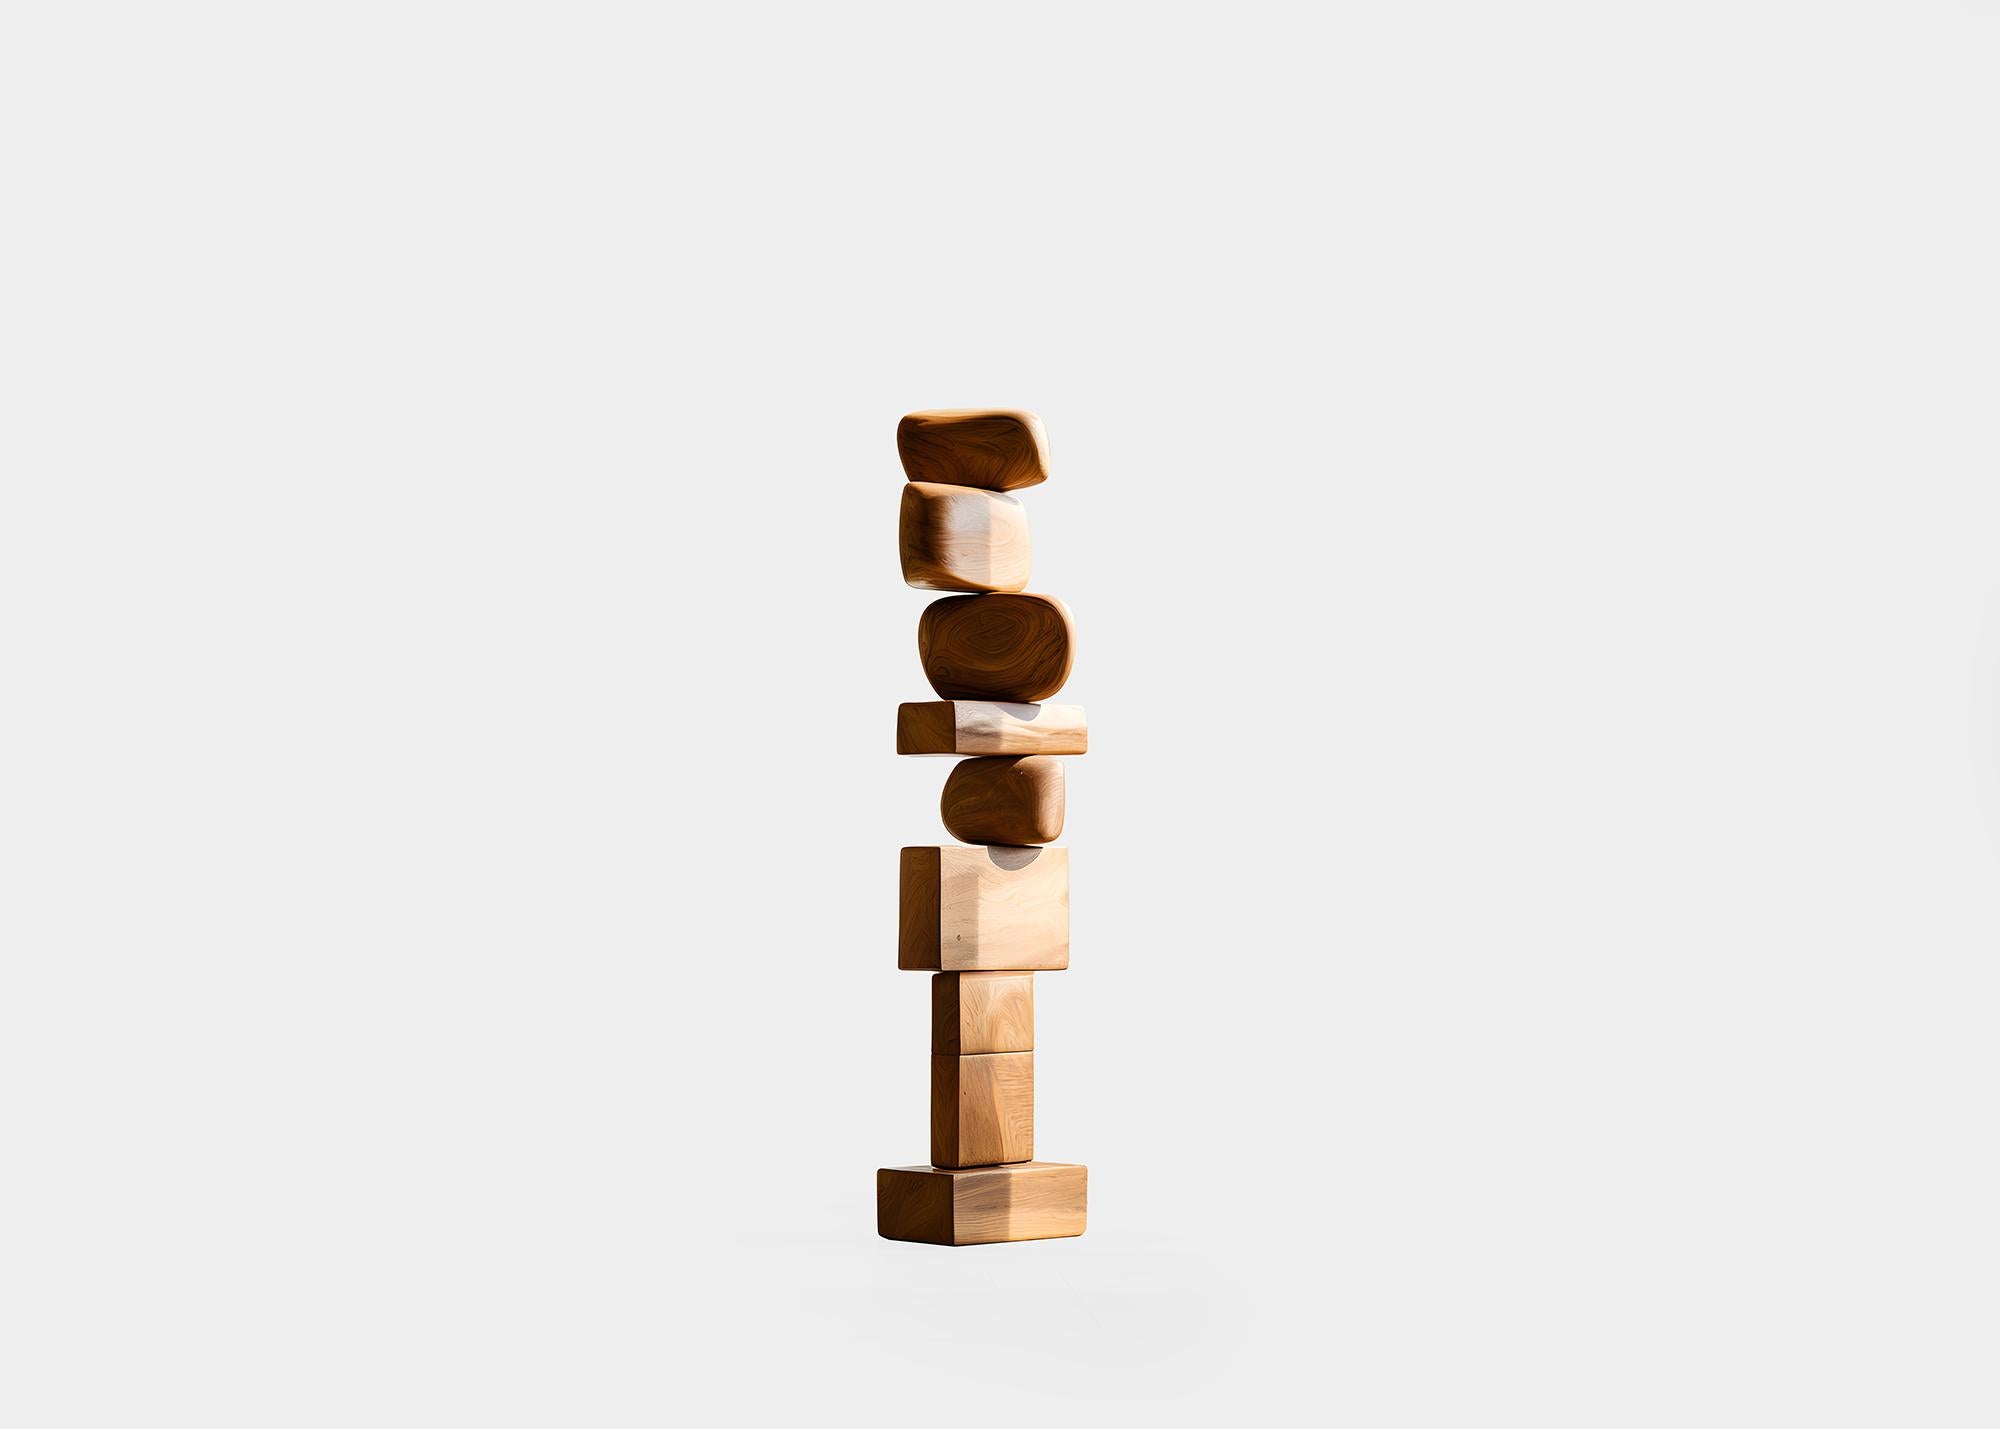 “Still Stand” sculptures by Joel Escalona

Joel Escalona's wooden standing sculptures are objects of raw beauty and serene grace. Each one is a testament to the power of the material, with smooth curves that flow into one another, inviting the